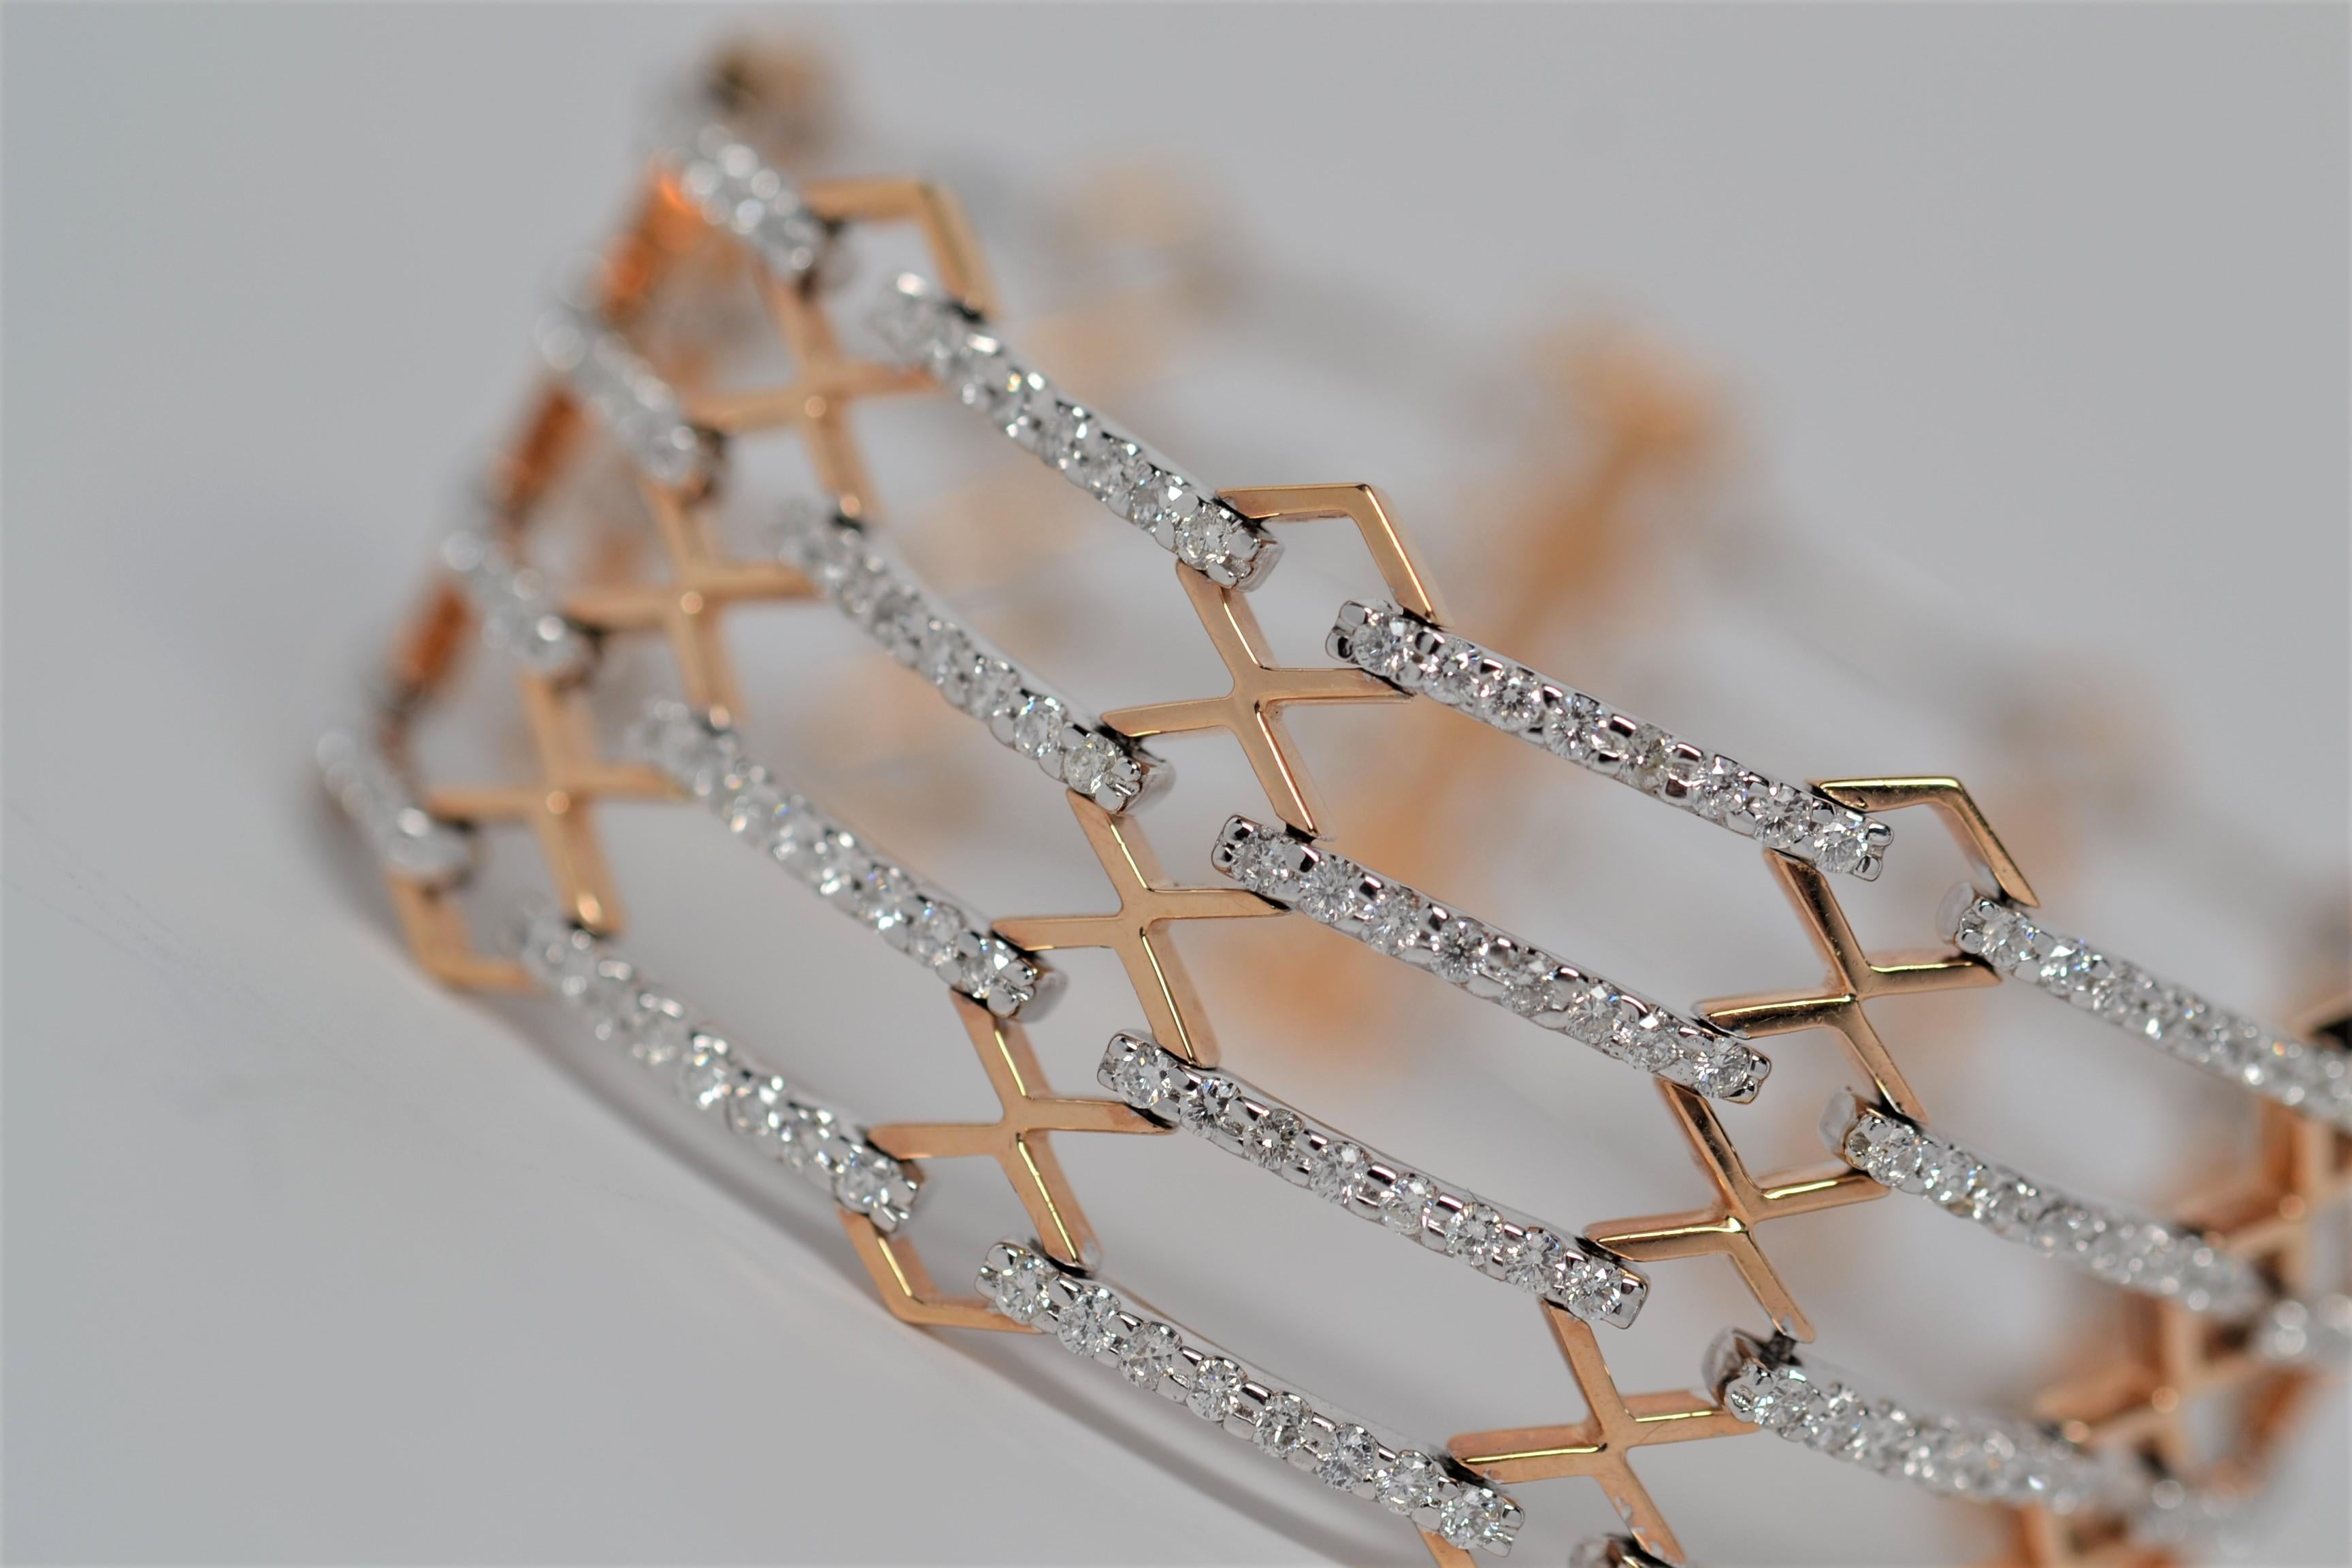 This finely made bracelet is a multi-row layout set in 18K White and Rose Gold. A total of three hundred and fifty two Round Brilliant Cut Diamonds weighing 4.03ct are set in single row strands using shared prongs. The diamonds are color grade range